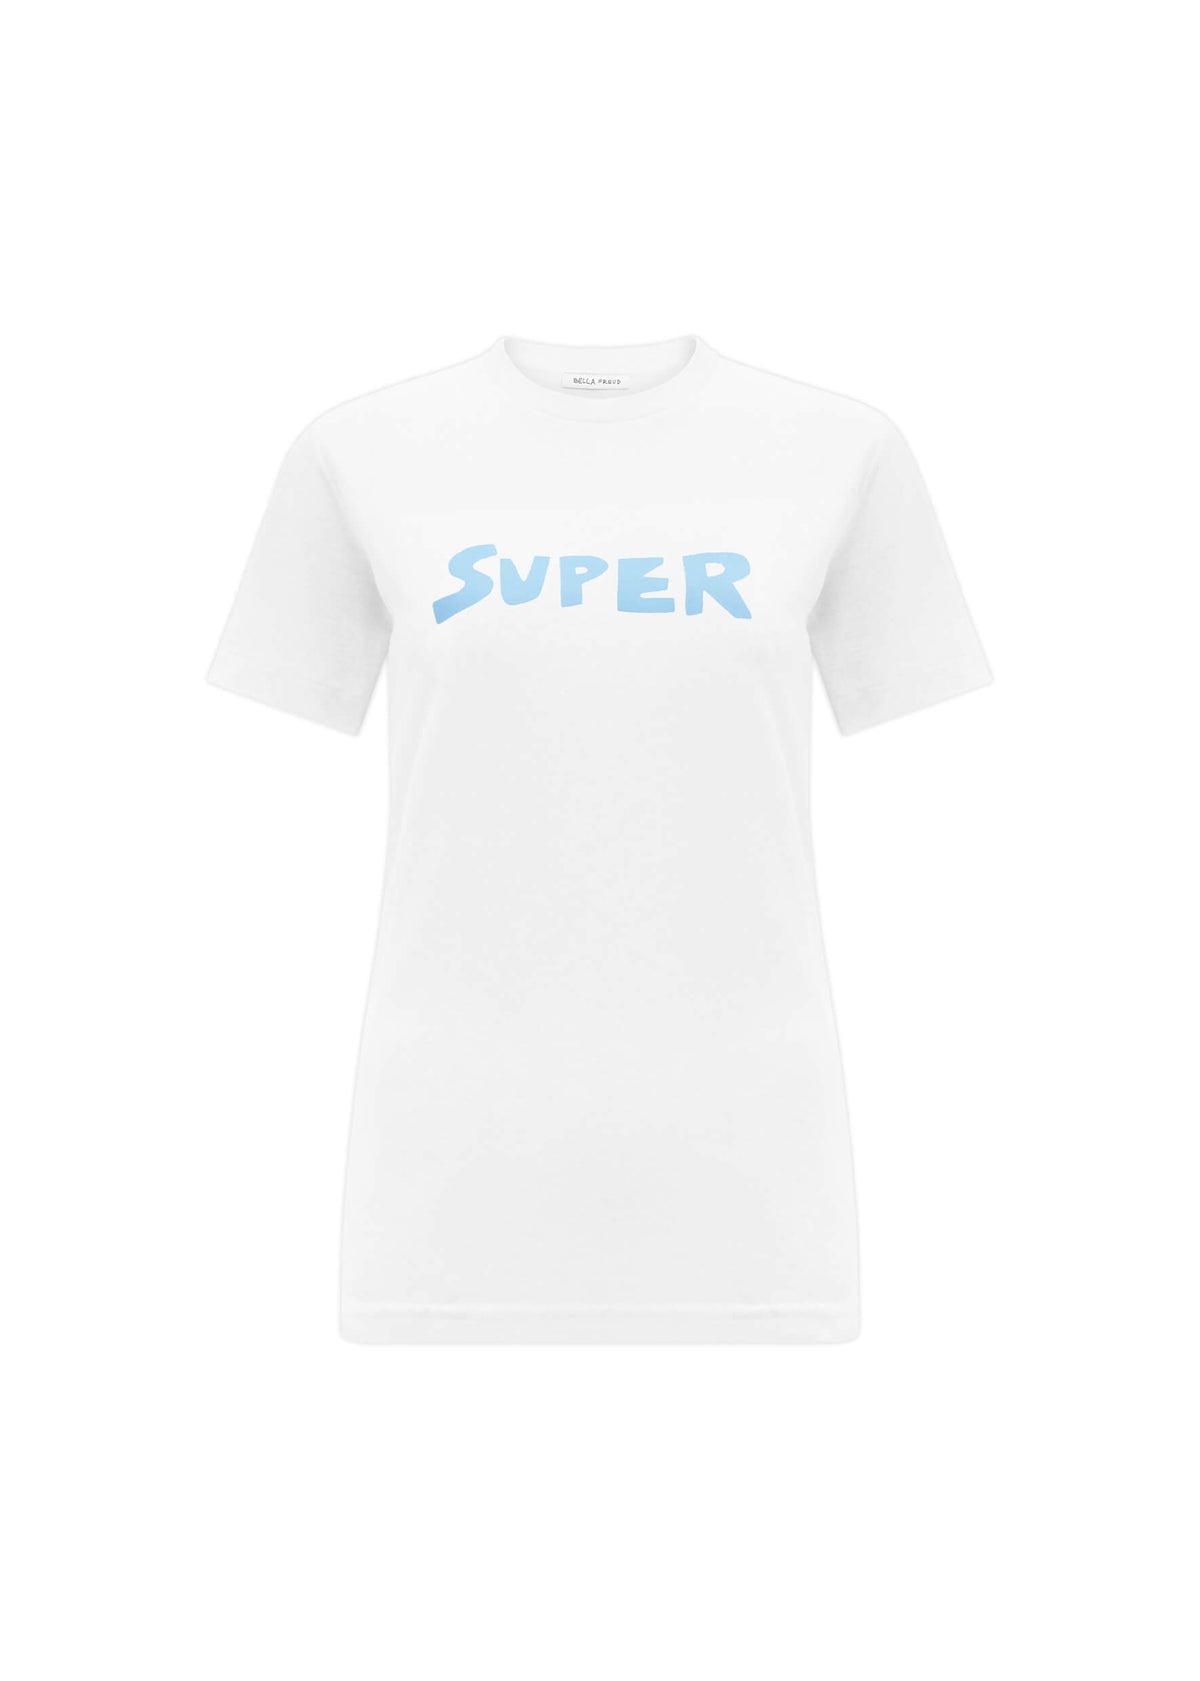 BF Super T shirt in white